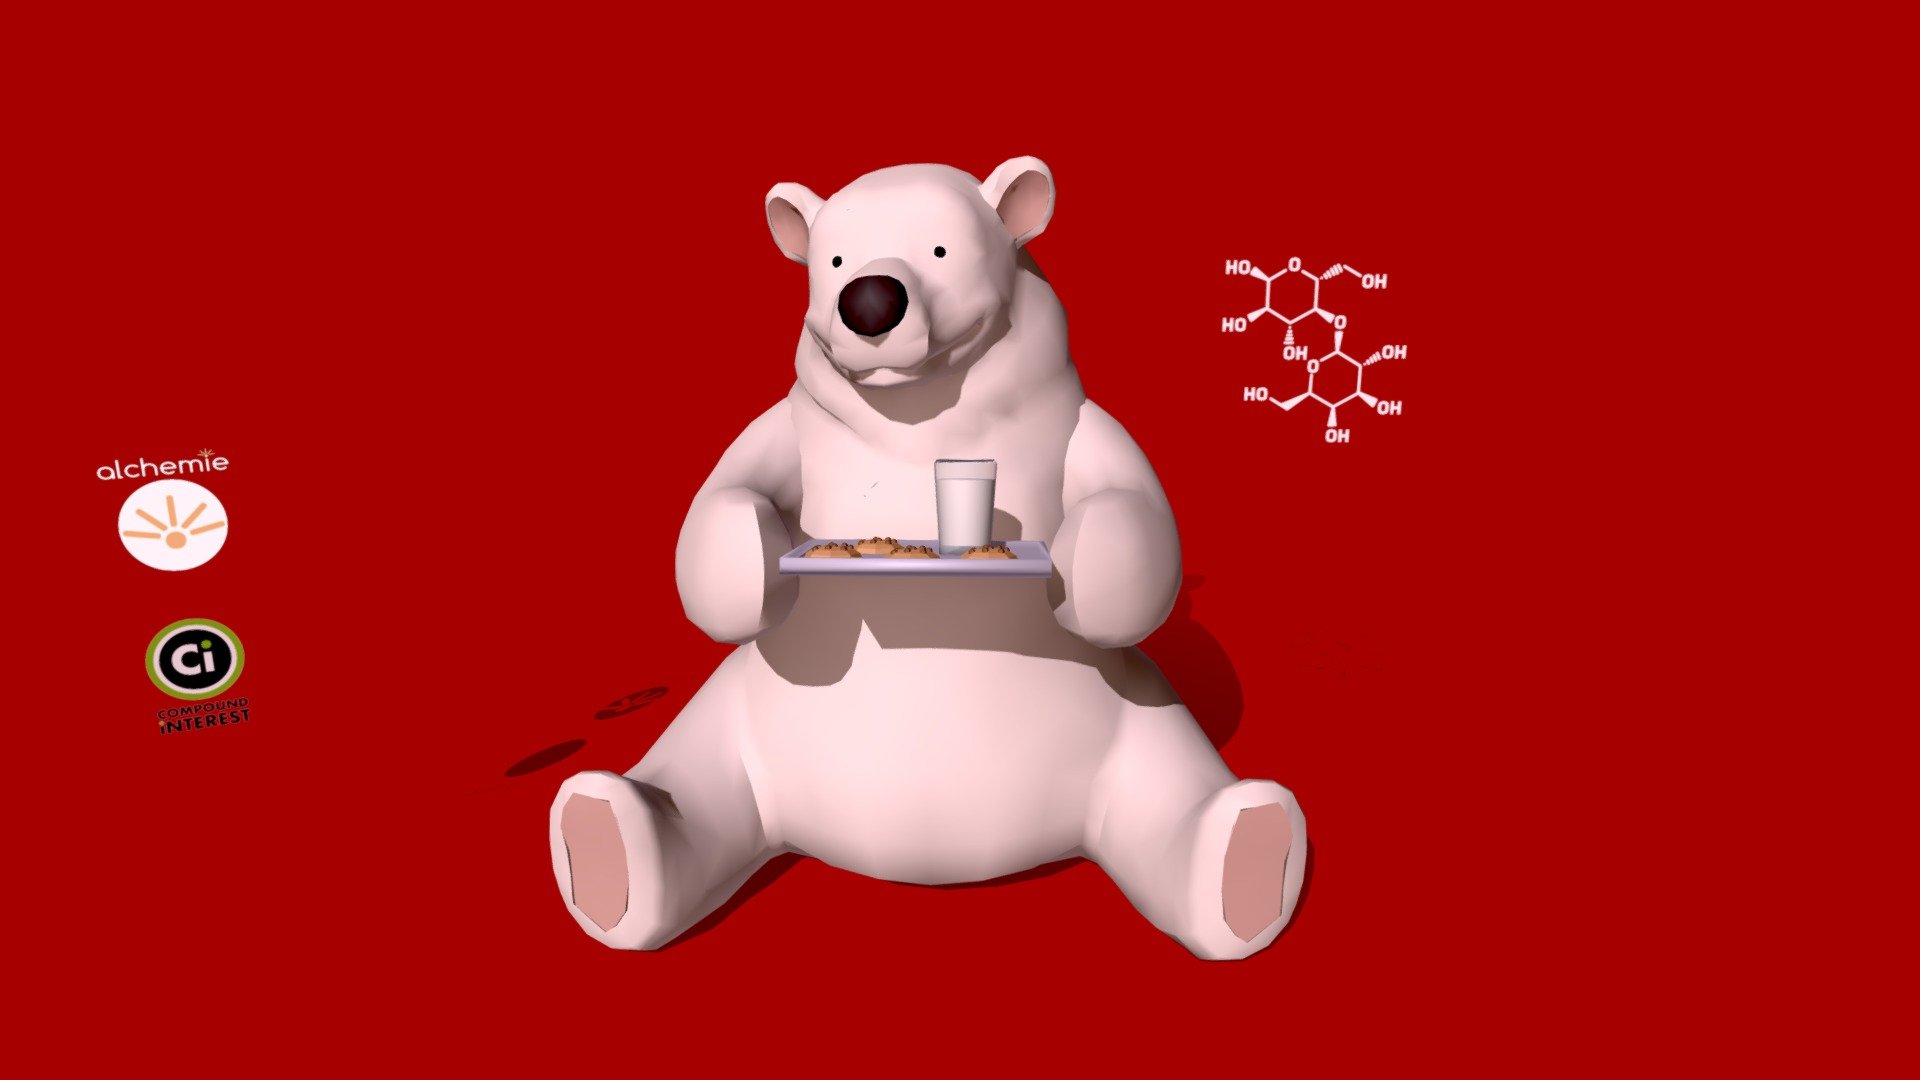 This sweet polar bear has prepared a batch of cookies and milk for Santa Claus! Take a look at the chemistry of what makes milk white.

See more here:
https://www.compoundchem.com/2018/06/02/milk/

See more fun chemistry GIFs here:
https://www.alchem.ie/gifs - Milk and Cookies for Santa - Compound Interest - 3D model by Elijah Sheffield (@ElijahMSheffield) 3d model